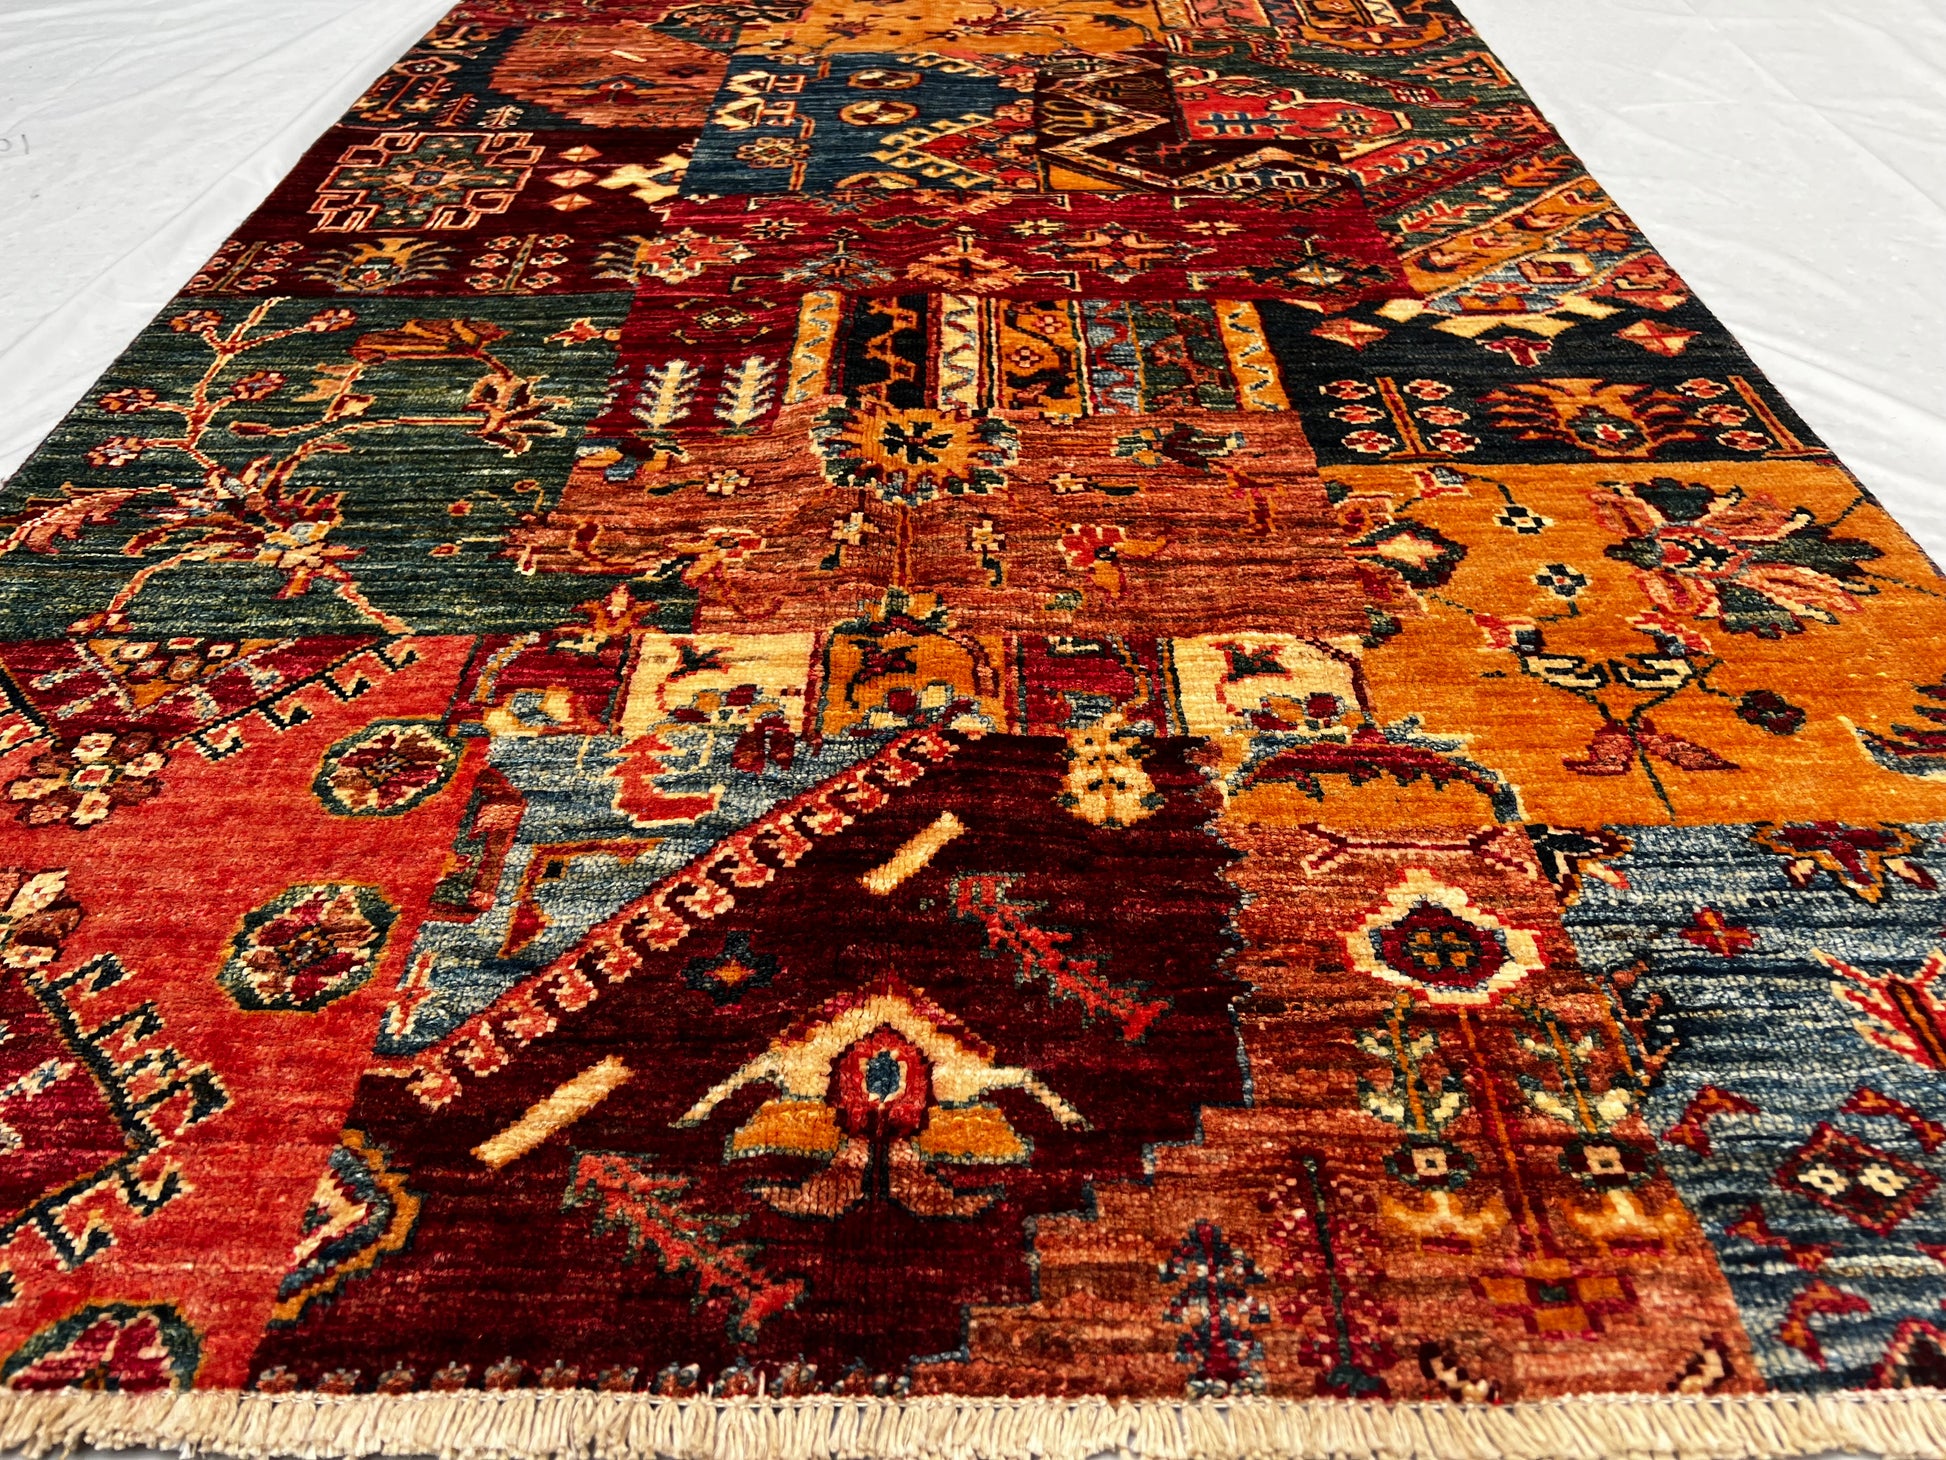 Afghan Hand Knotted/ Knitted Living Room/Dining Room Chob Rang(Shawl Design) Area Rug 4.7ftx3.1ft (CH-M-4.7X3.12-6-N) (Kabul) - Kabul Rugs